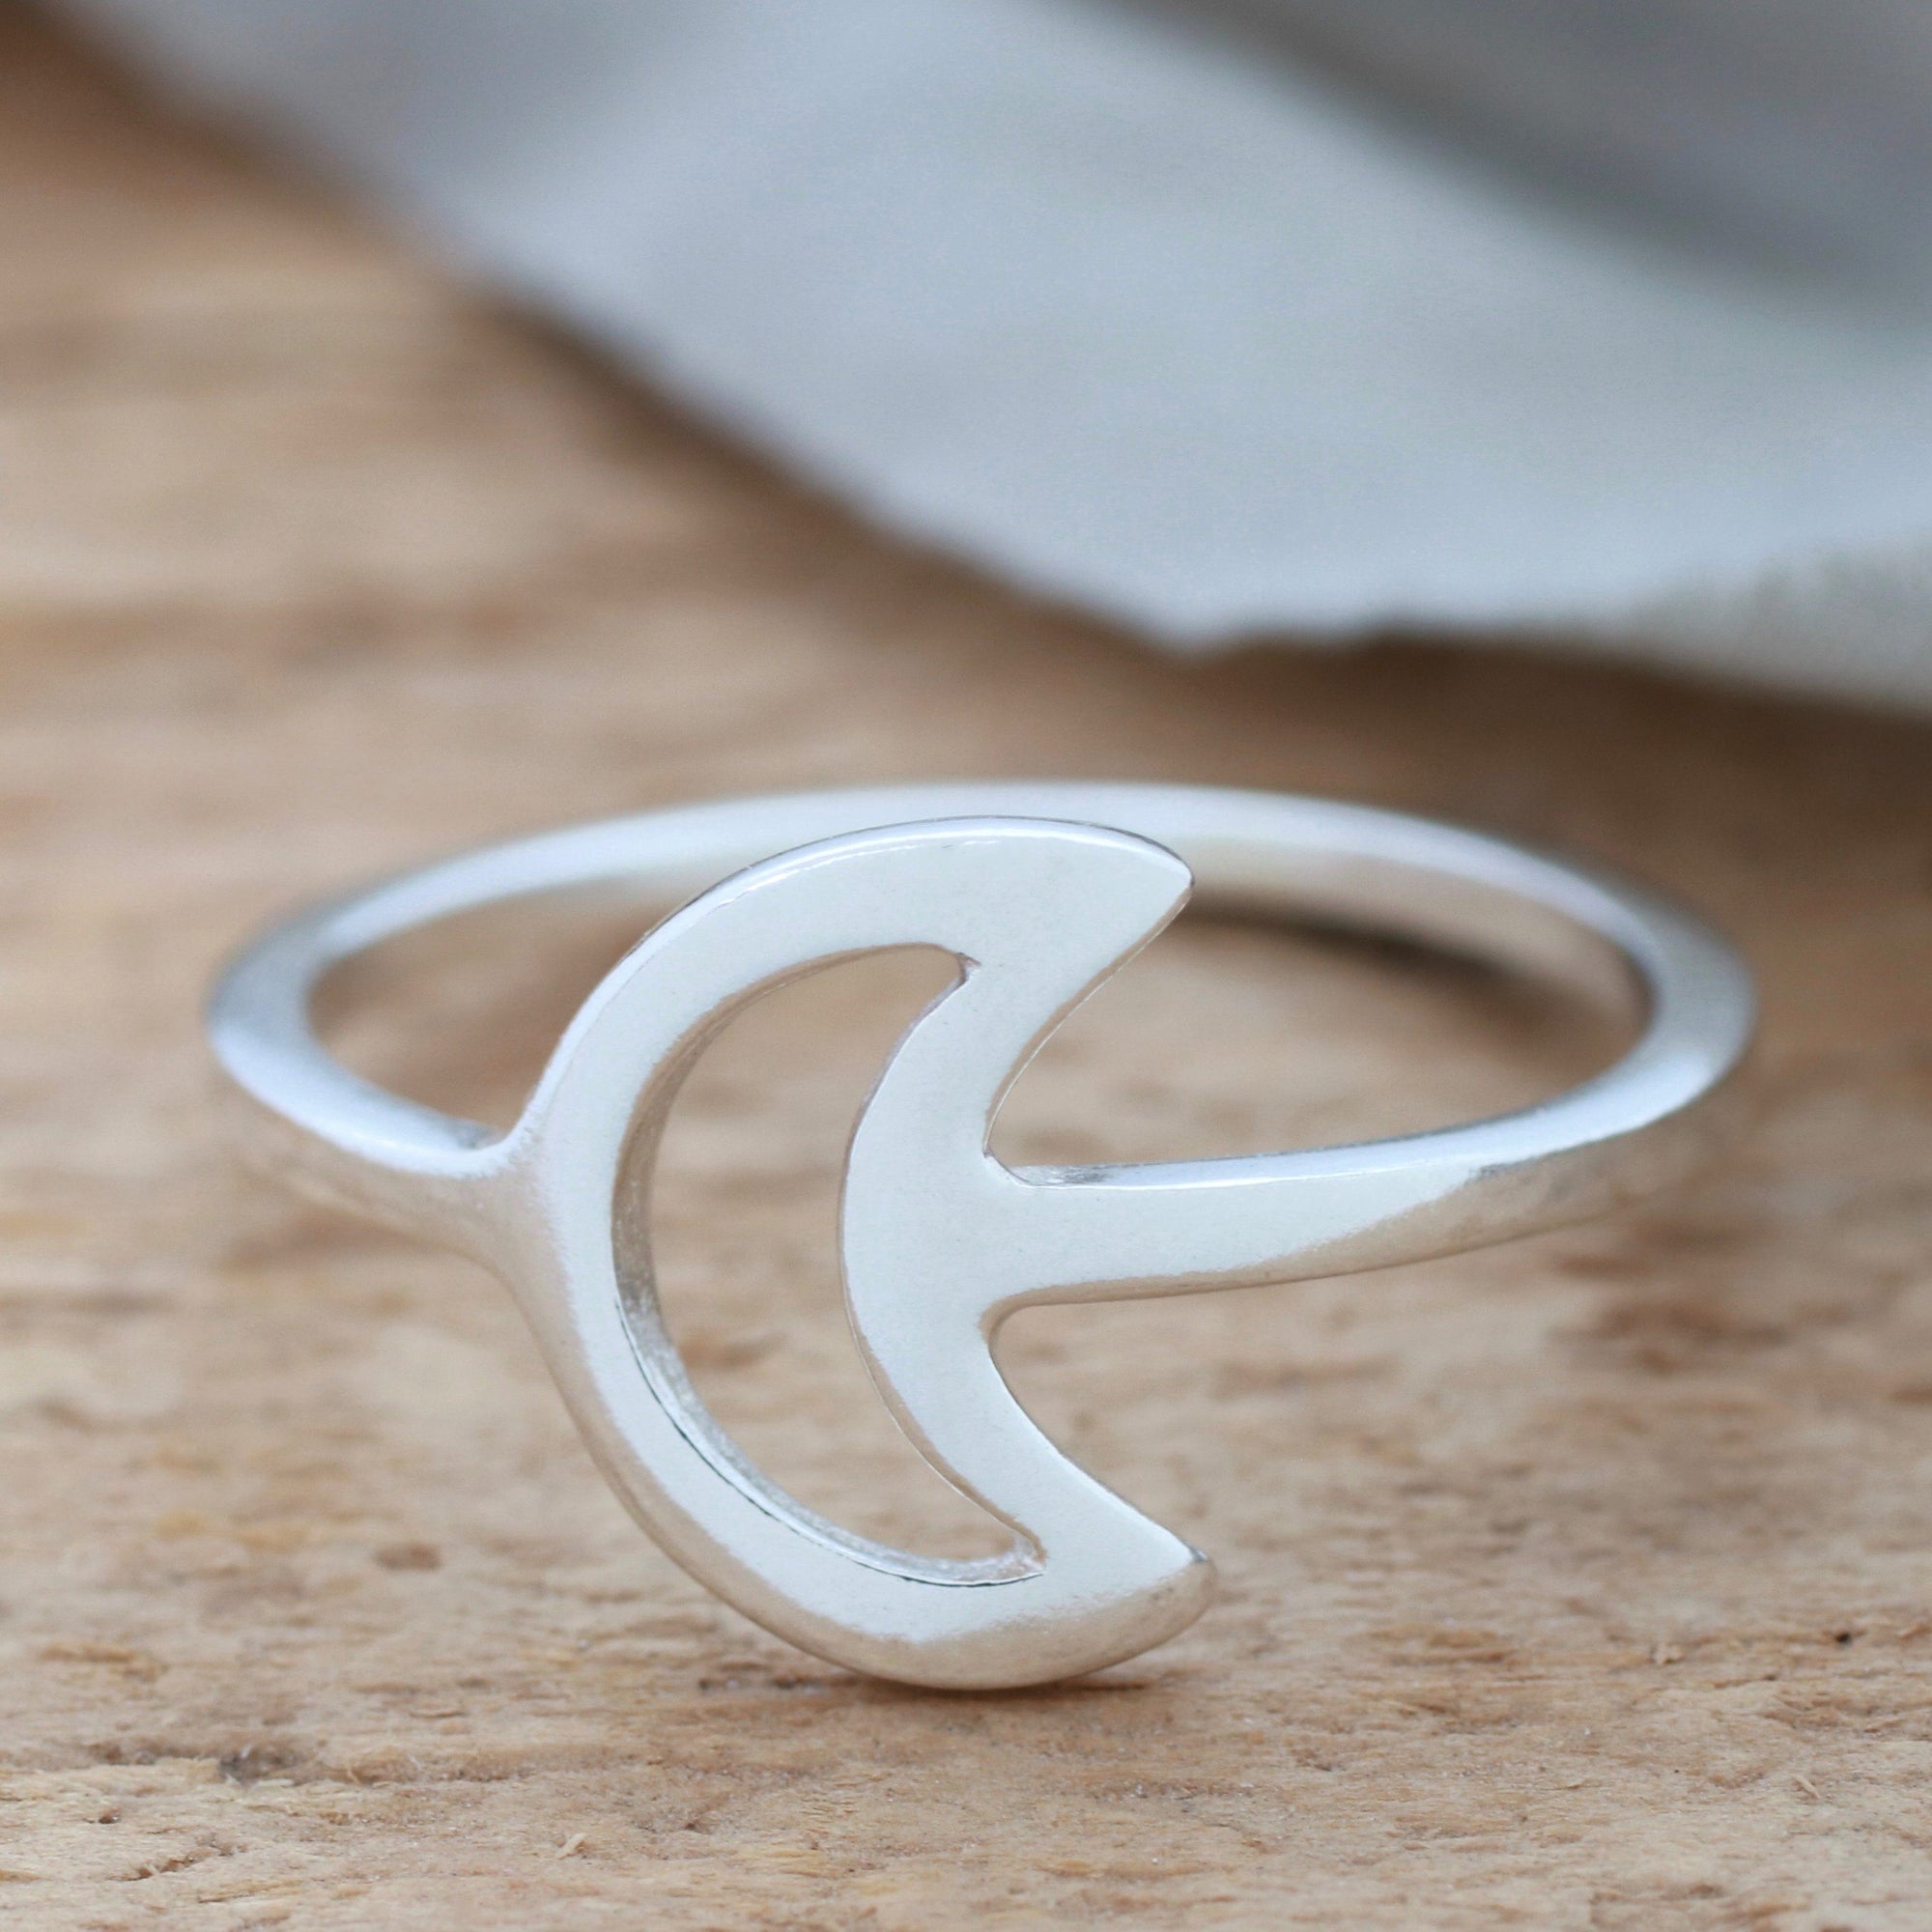 Silver Crescent Moon Ring. Celestial Ring